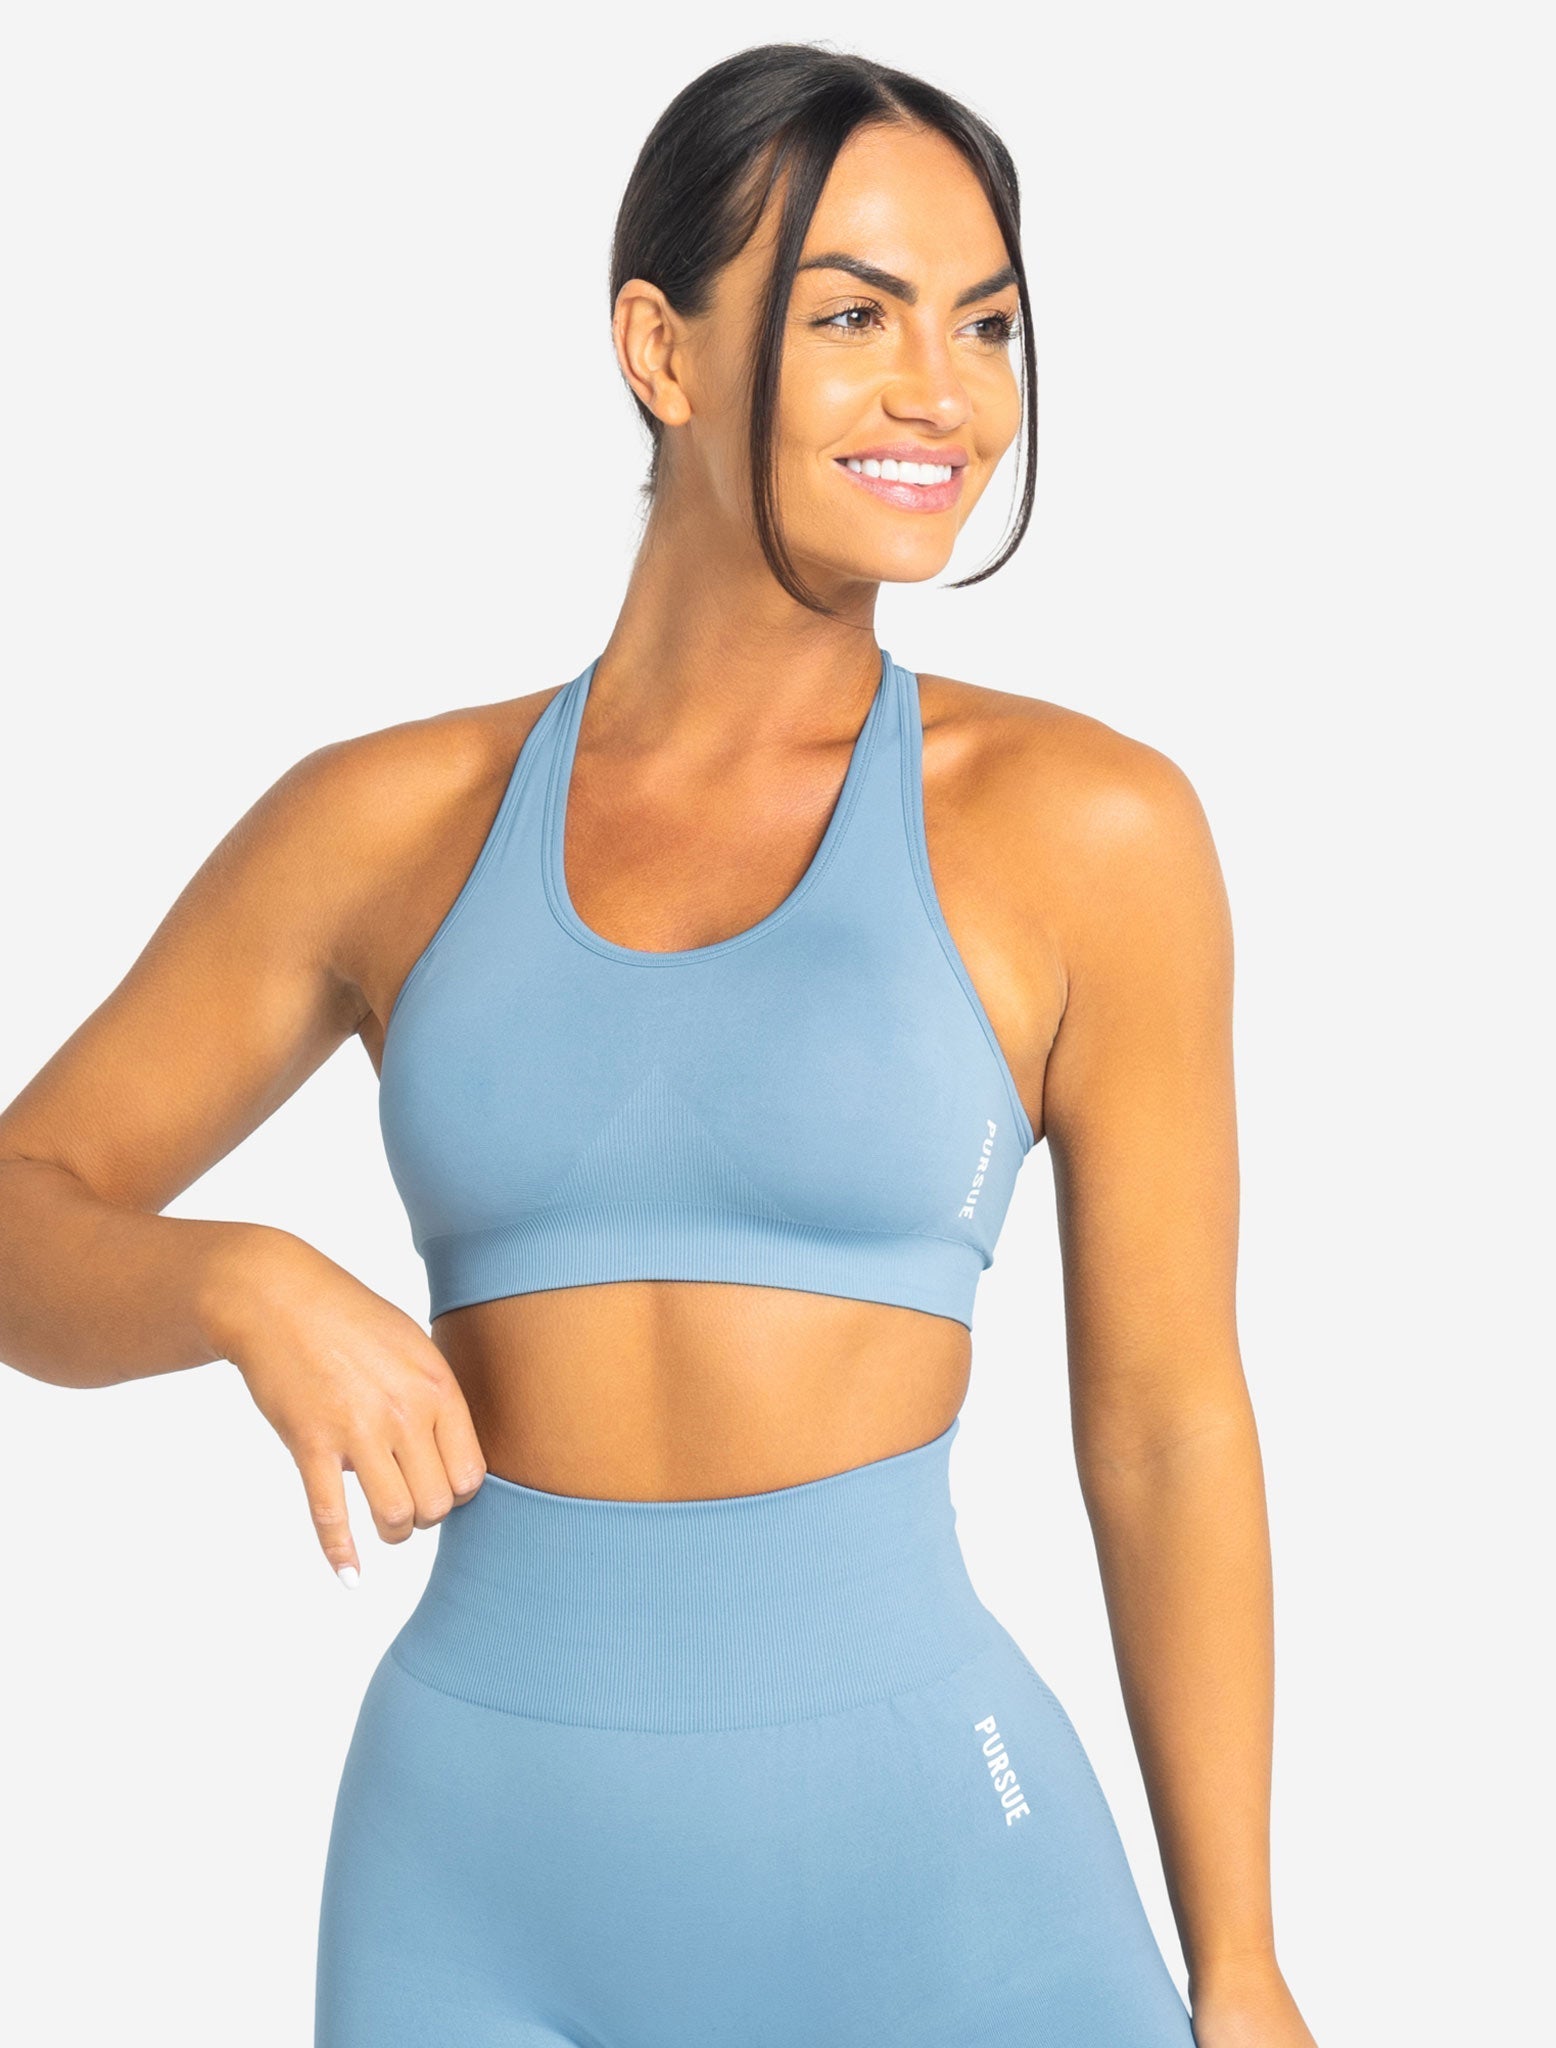 NEW Running Bare XS Sports Bra Strappy Push-Up Crop Top Blue Australia  Workout 2 - $65 New With Tags - From Jessica